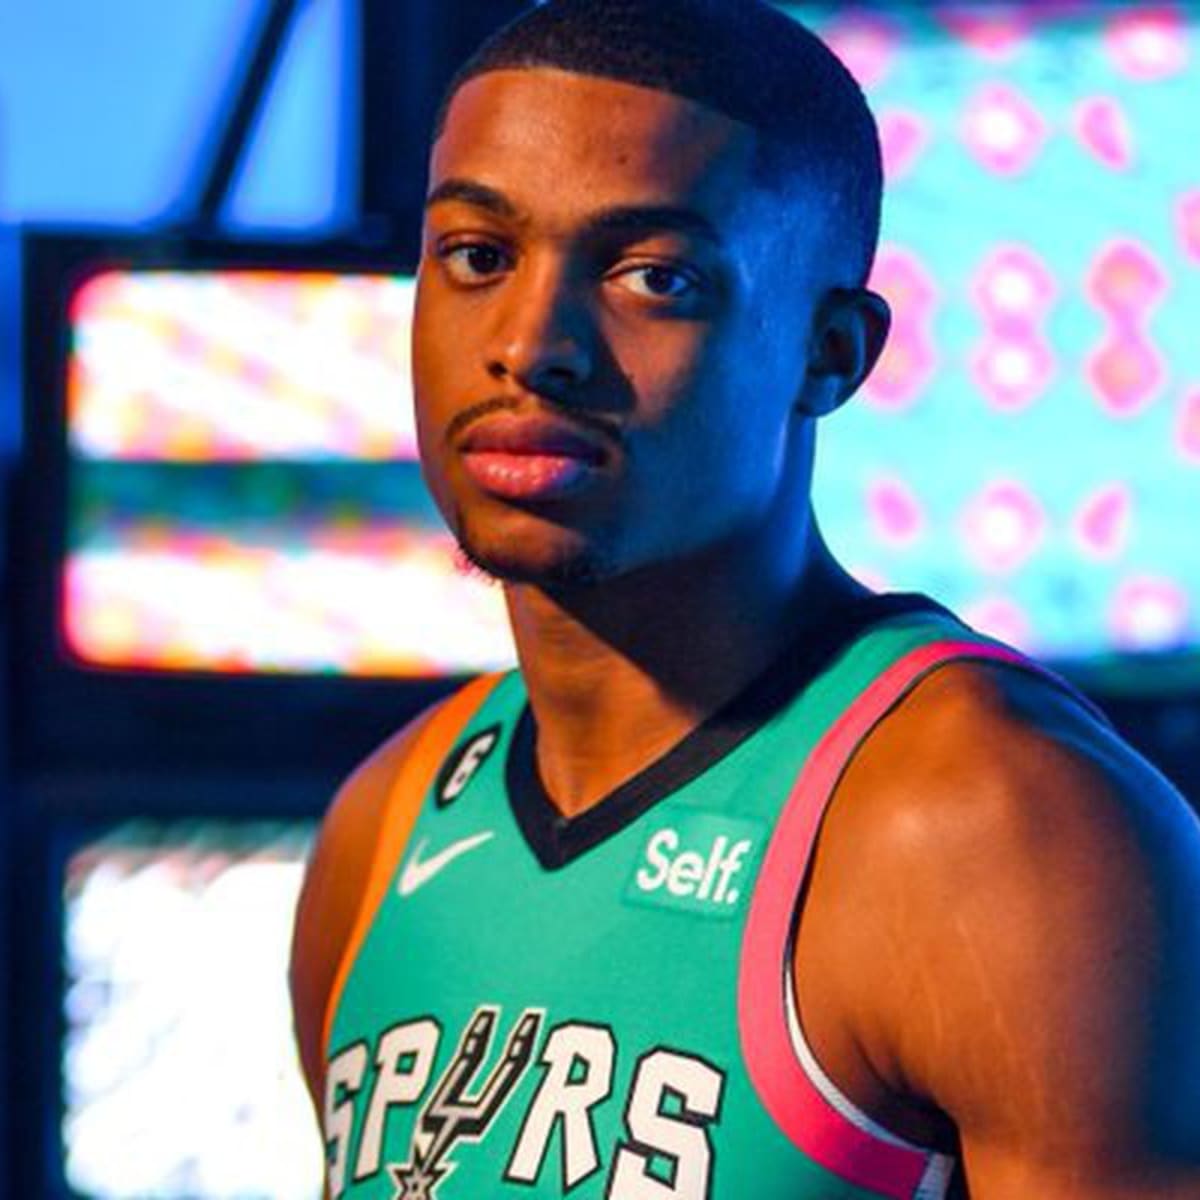 SPURS UNVEIL FIESTA-THEMED NIKE CITY EDITION UNIFORMS AHEAD OF